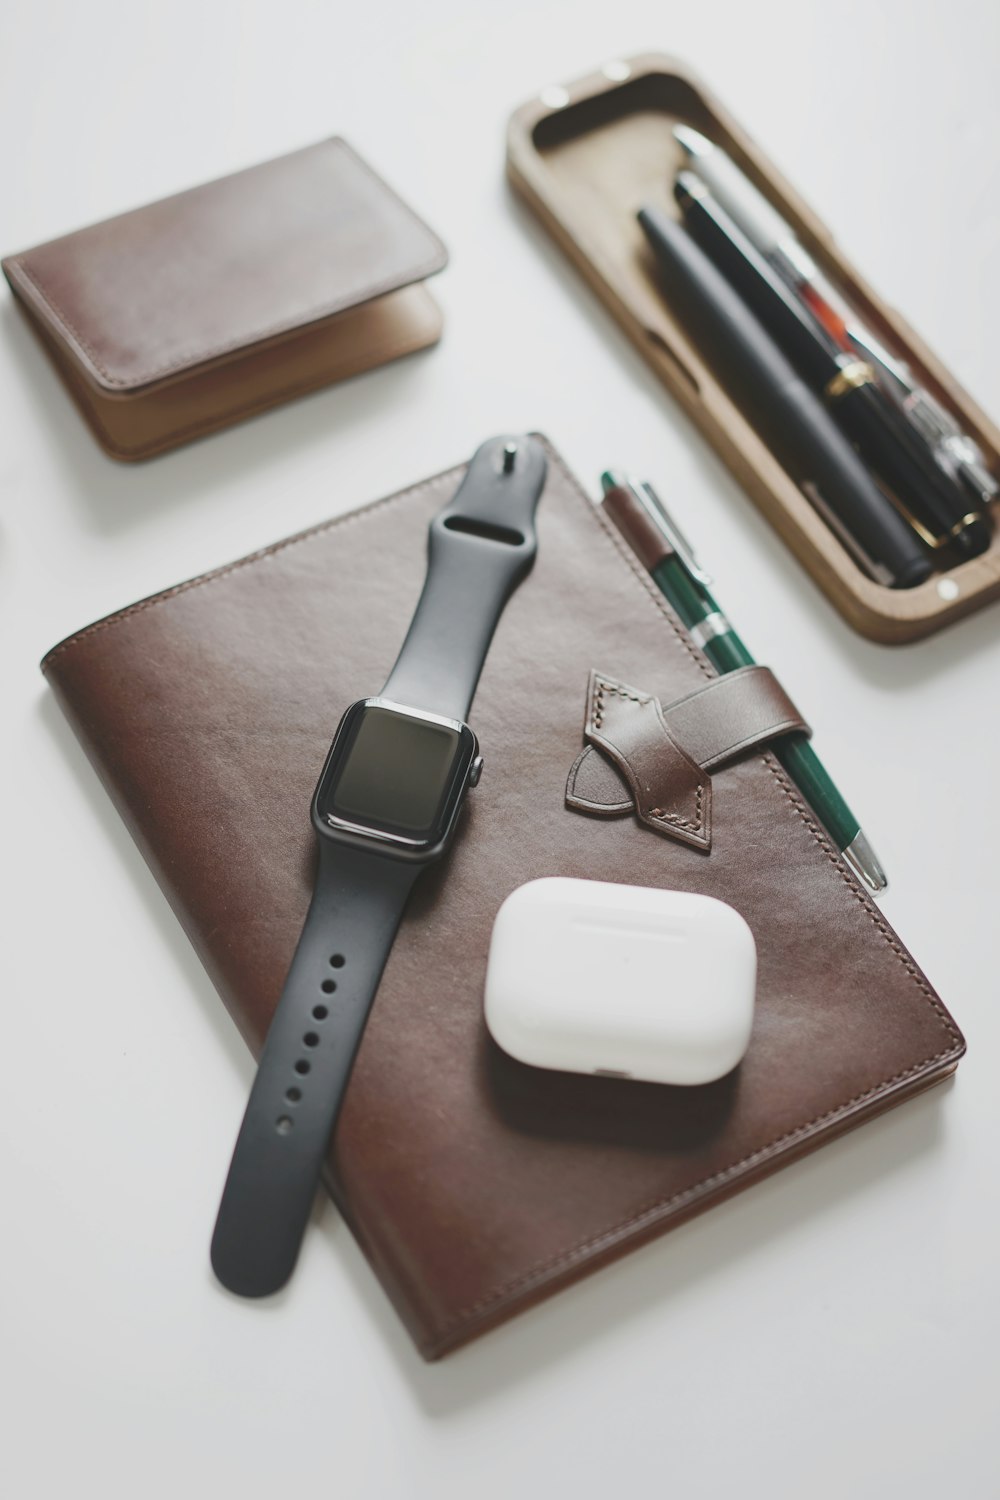 an apple watch, pen, and wallet on a table